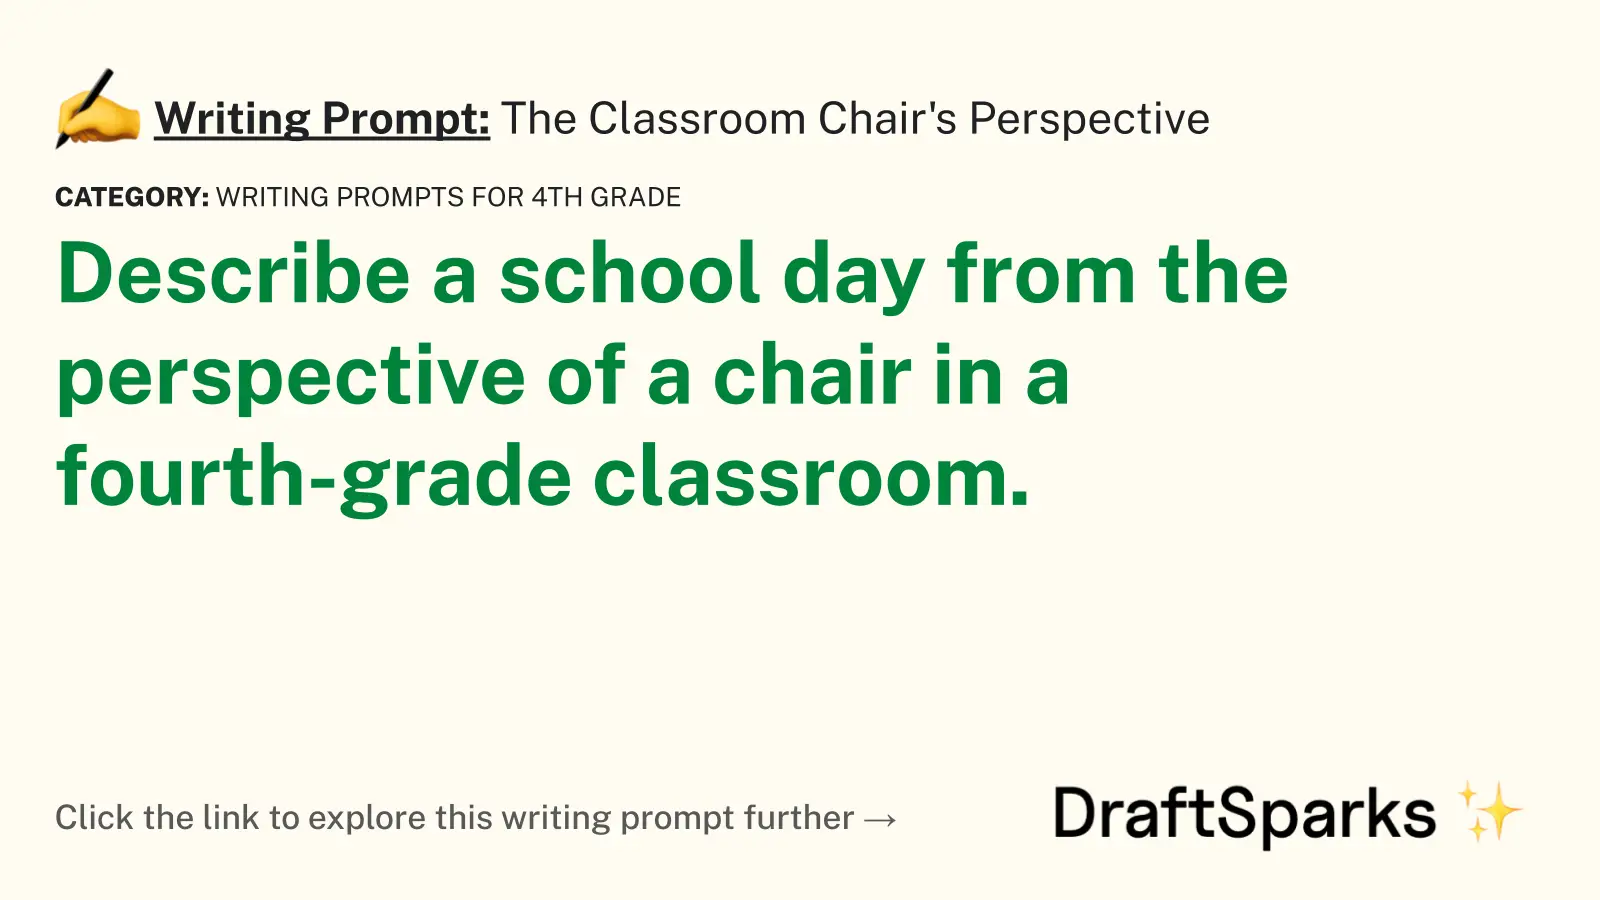 The Classroom Chair’s Perspective